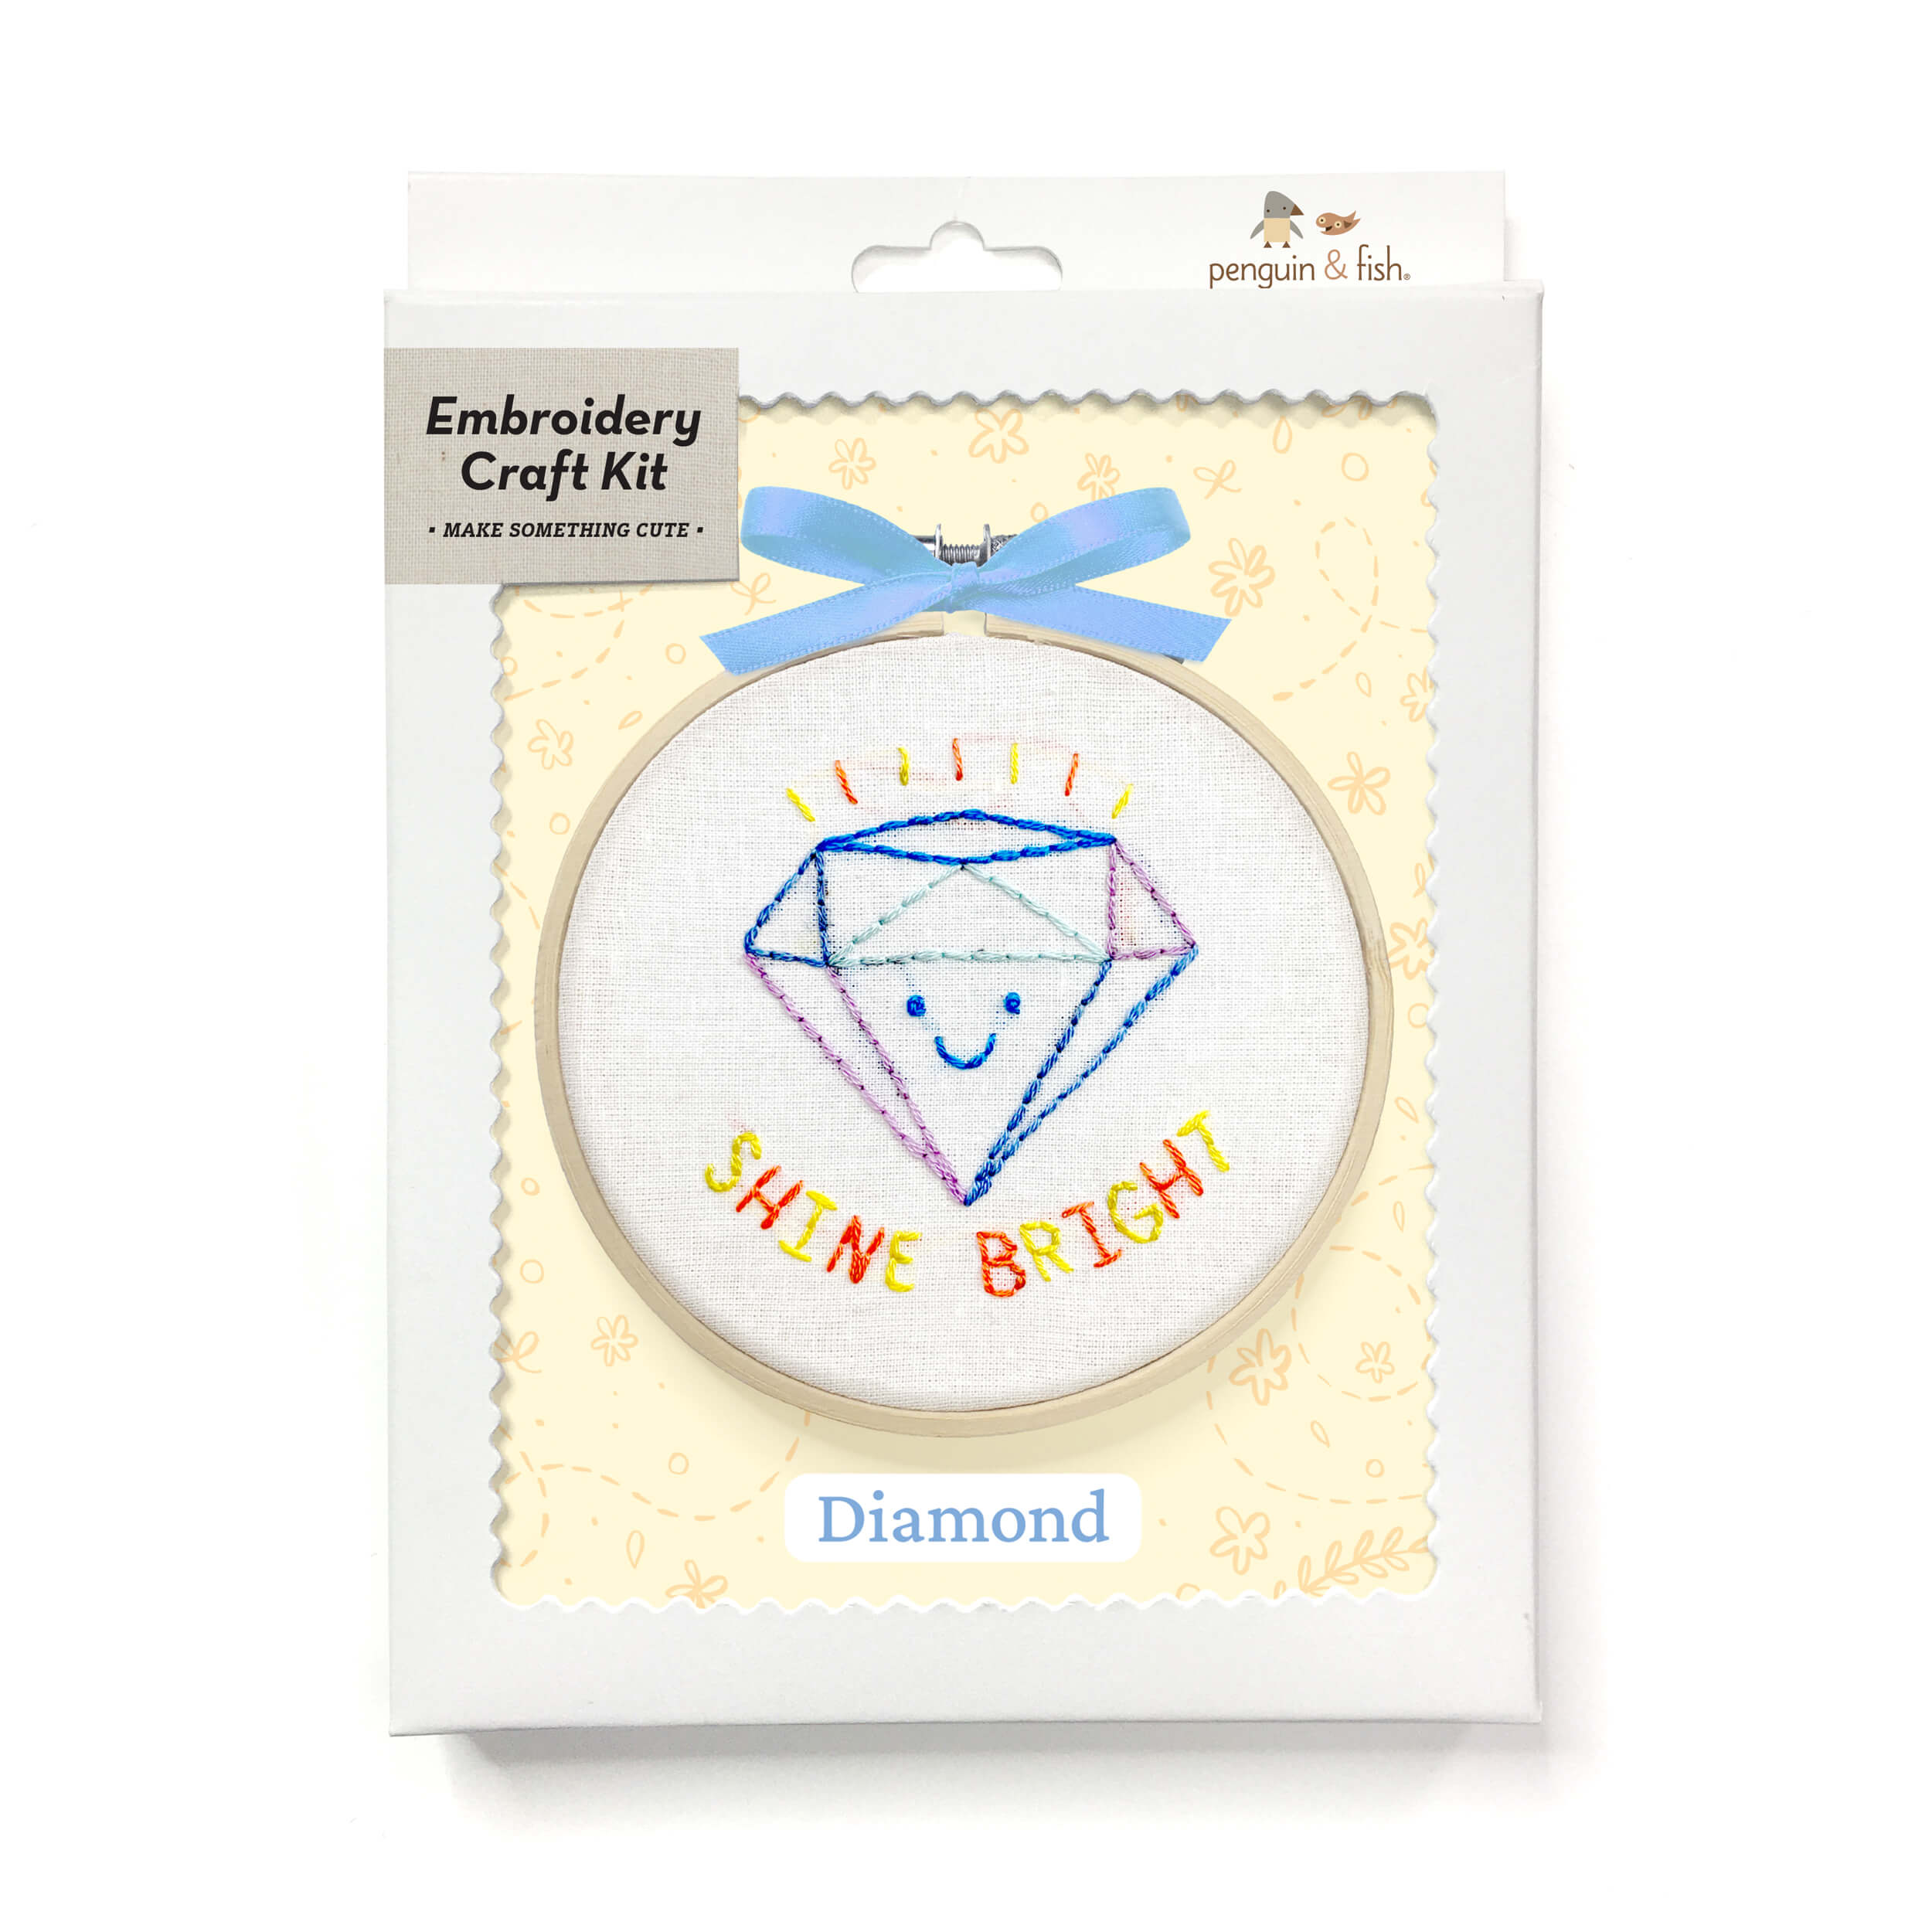 Diamond 4-inch embroidery kit in a box